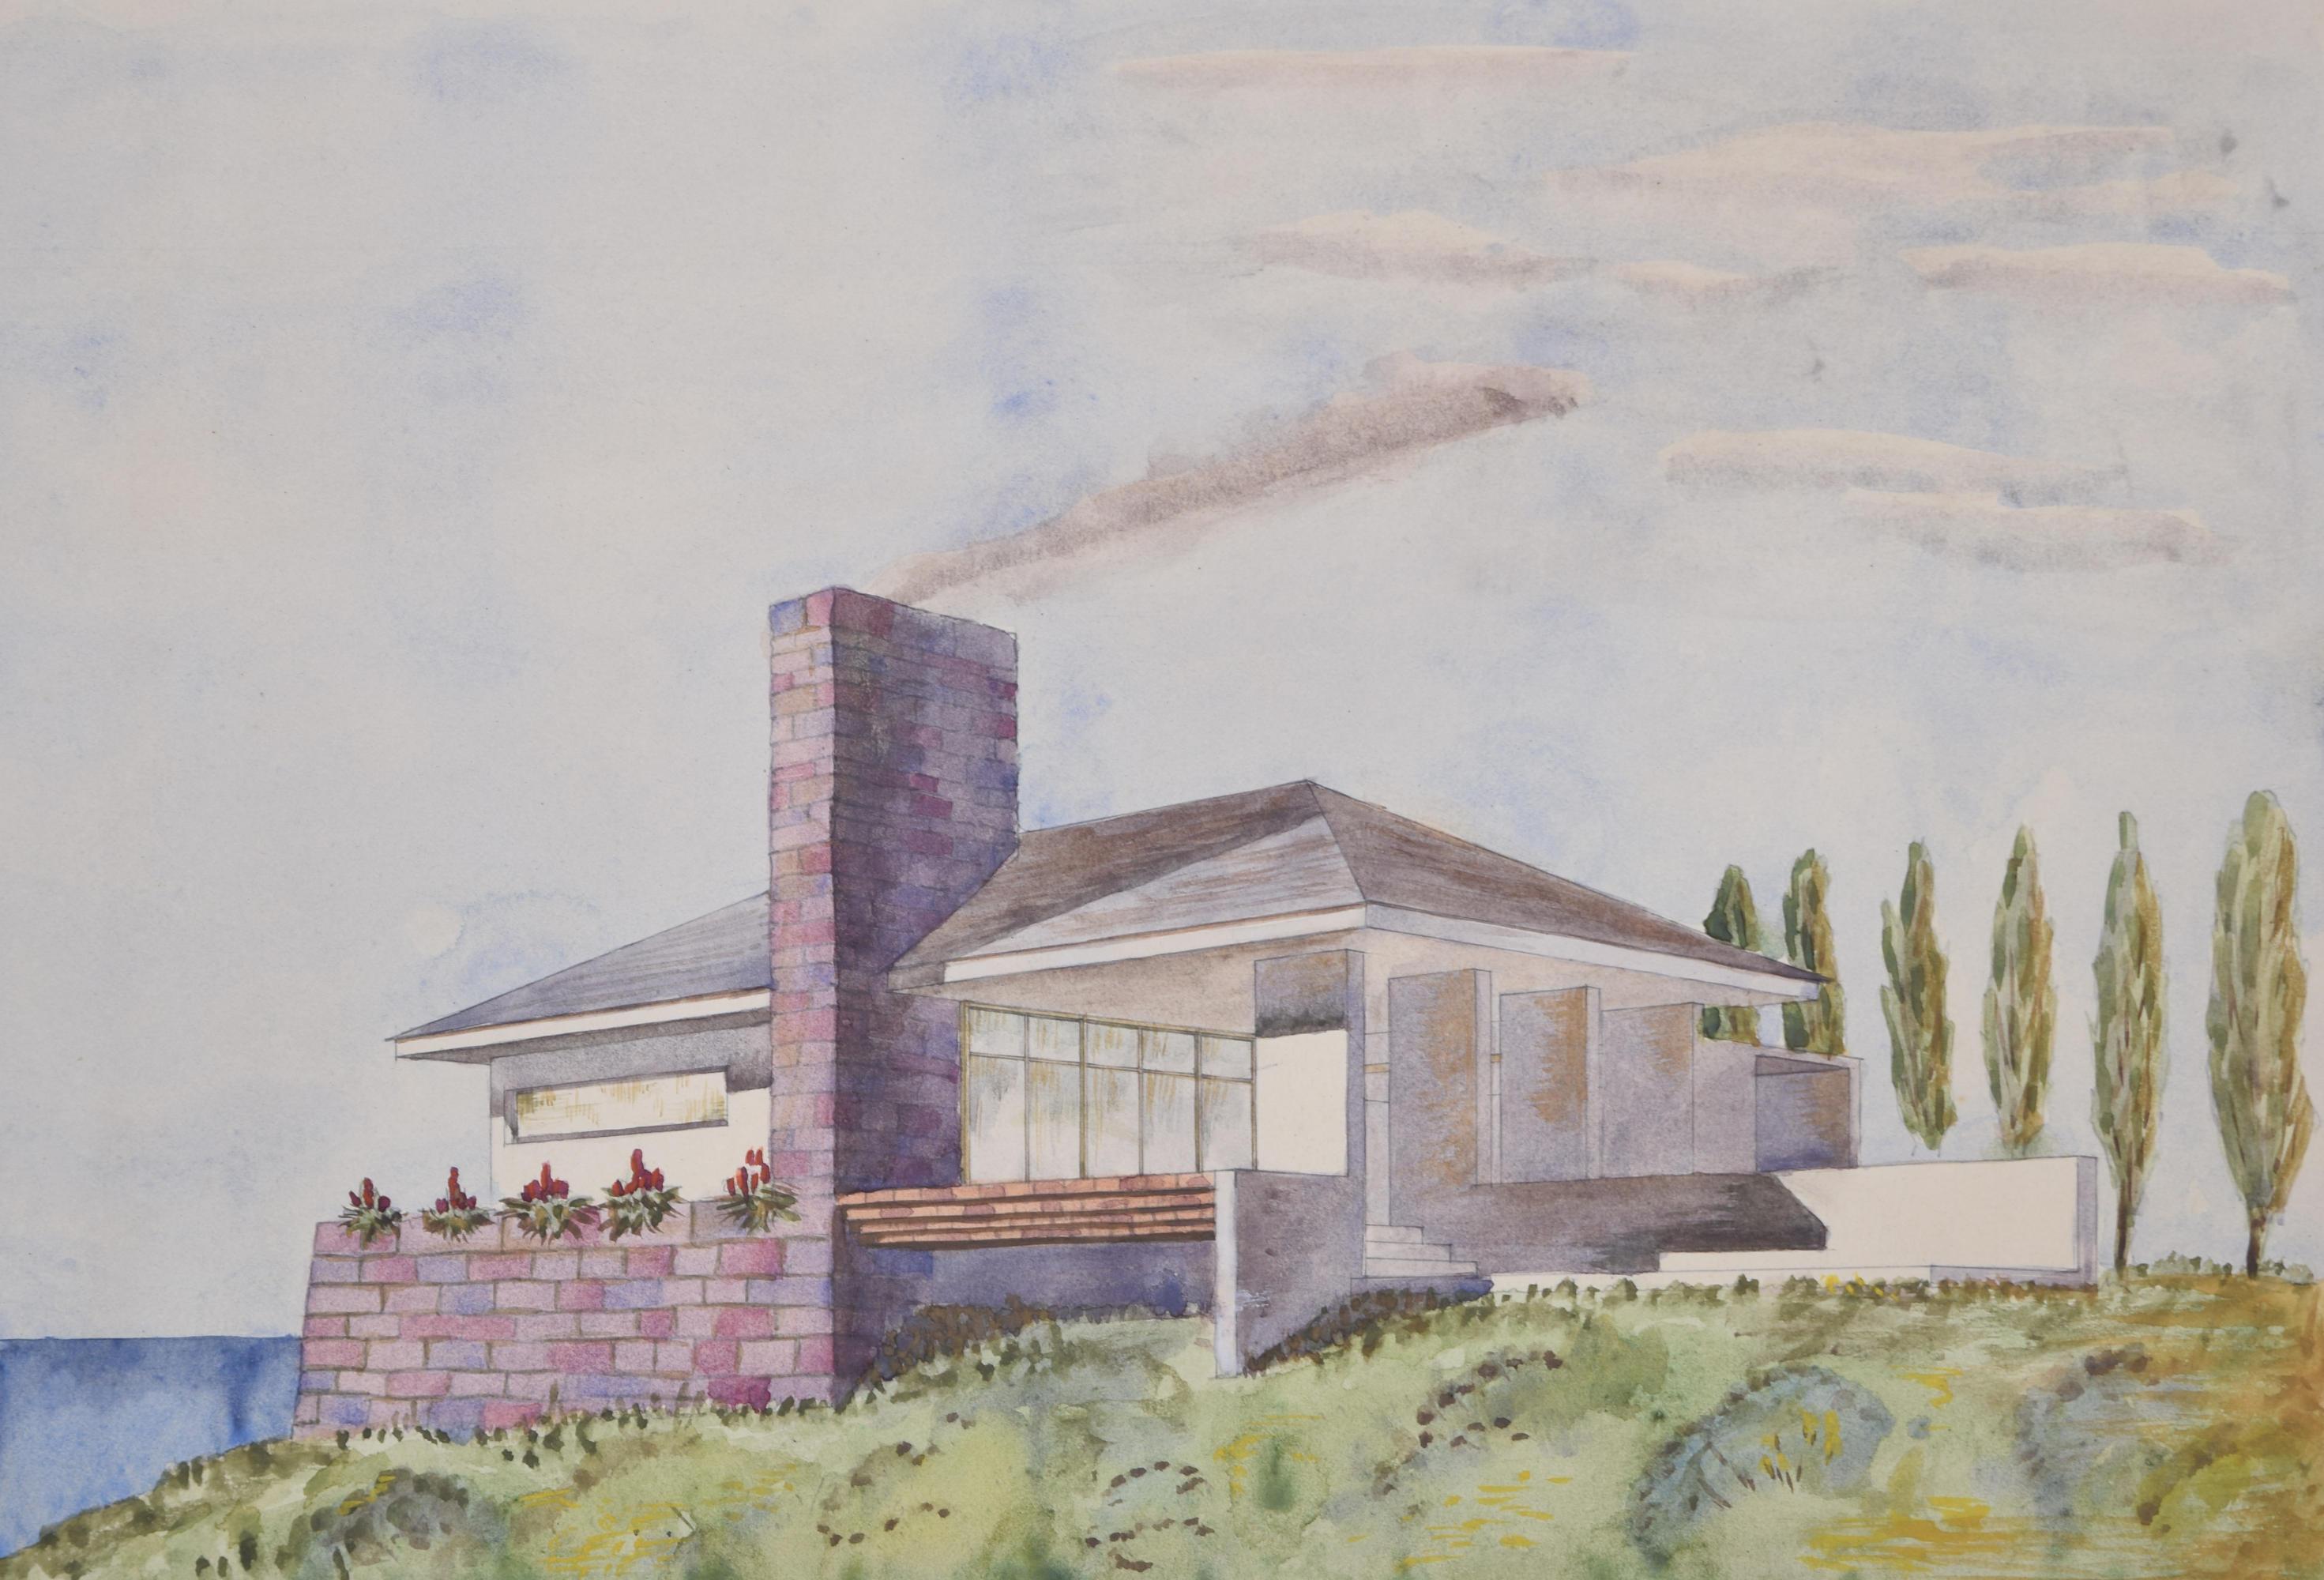 To see more, scroll down to "More from this Seller" and below it click on "See all from this Seller." 

S Clapham (active 1940 - 1960)
Design for Modernist Seaside House
Watercolour
27 x 40 cm

Clapham was an architect based in Stockwell in London.